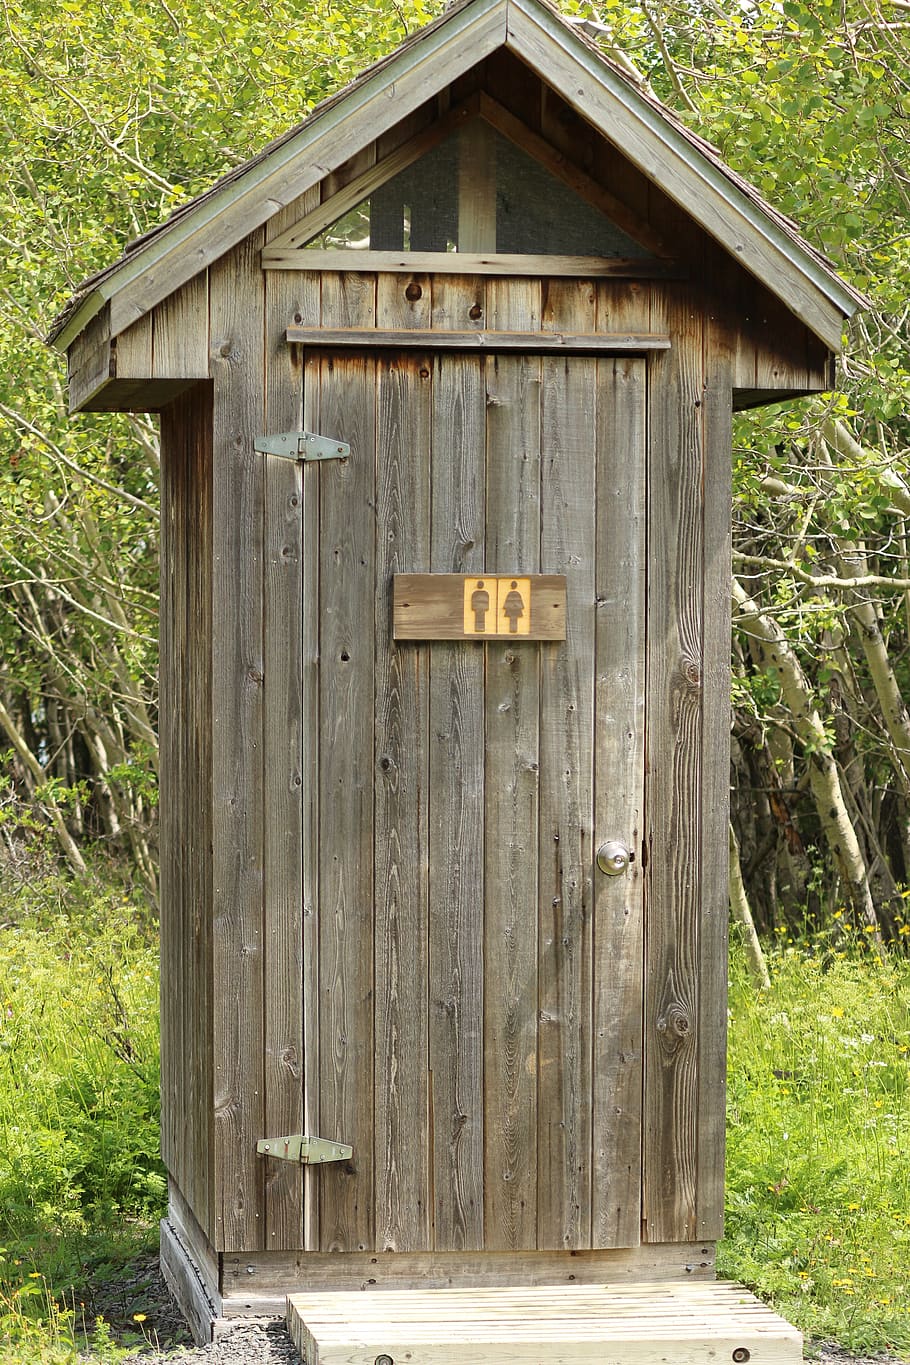 toilet, wc, funny, health, constipation, hygiene, wood - material, communication, built structure, architecture